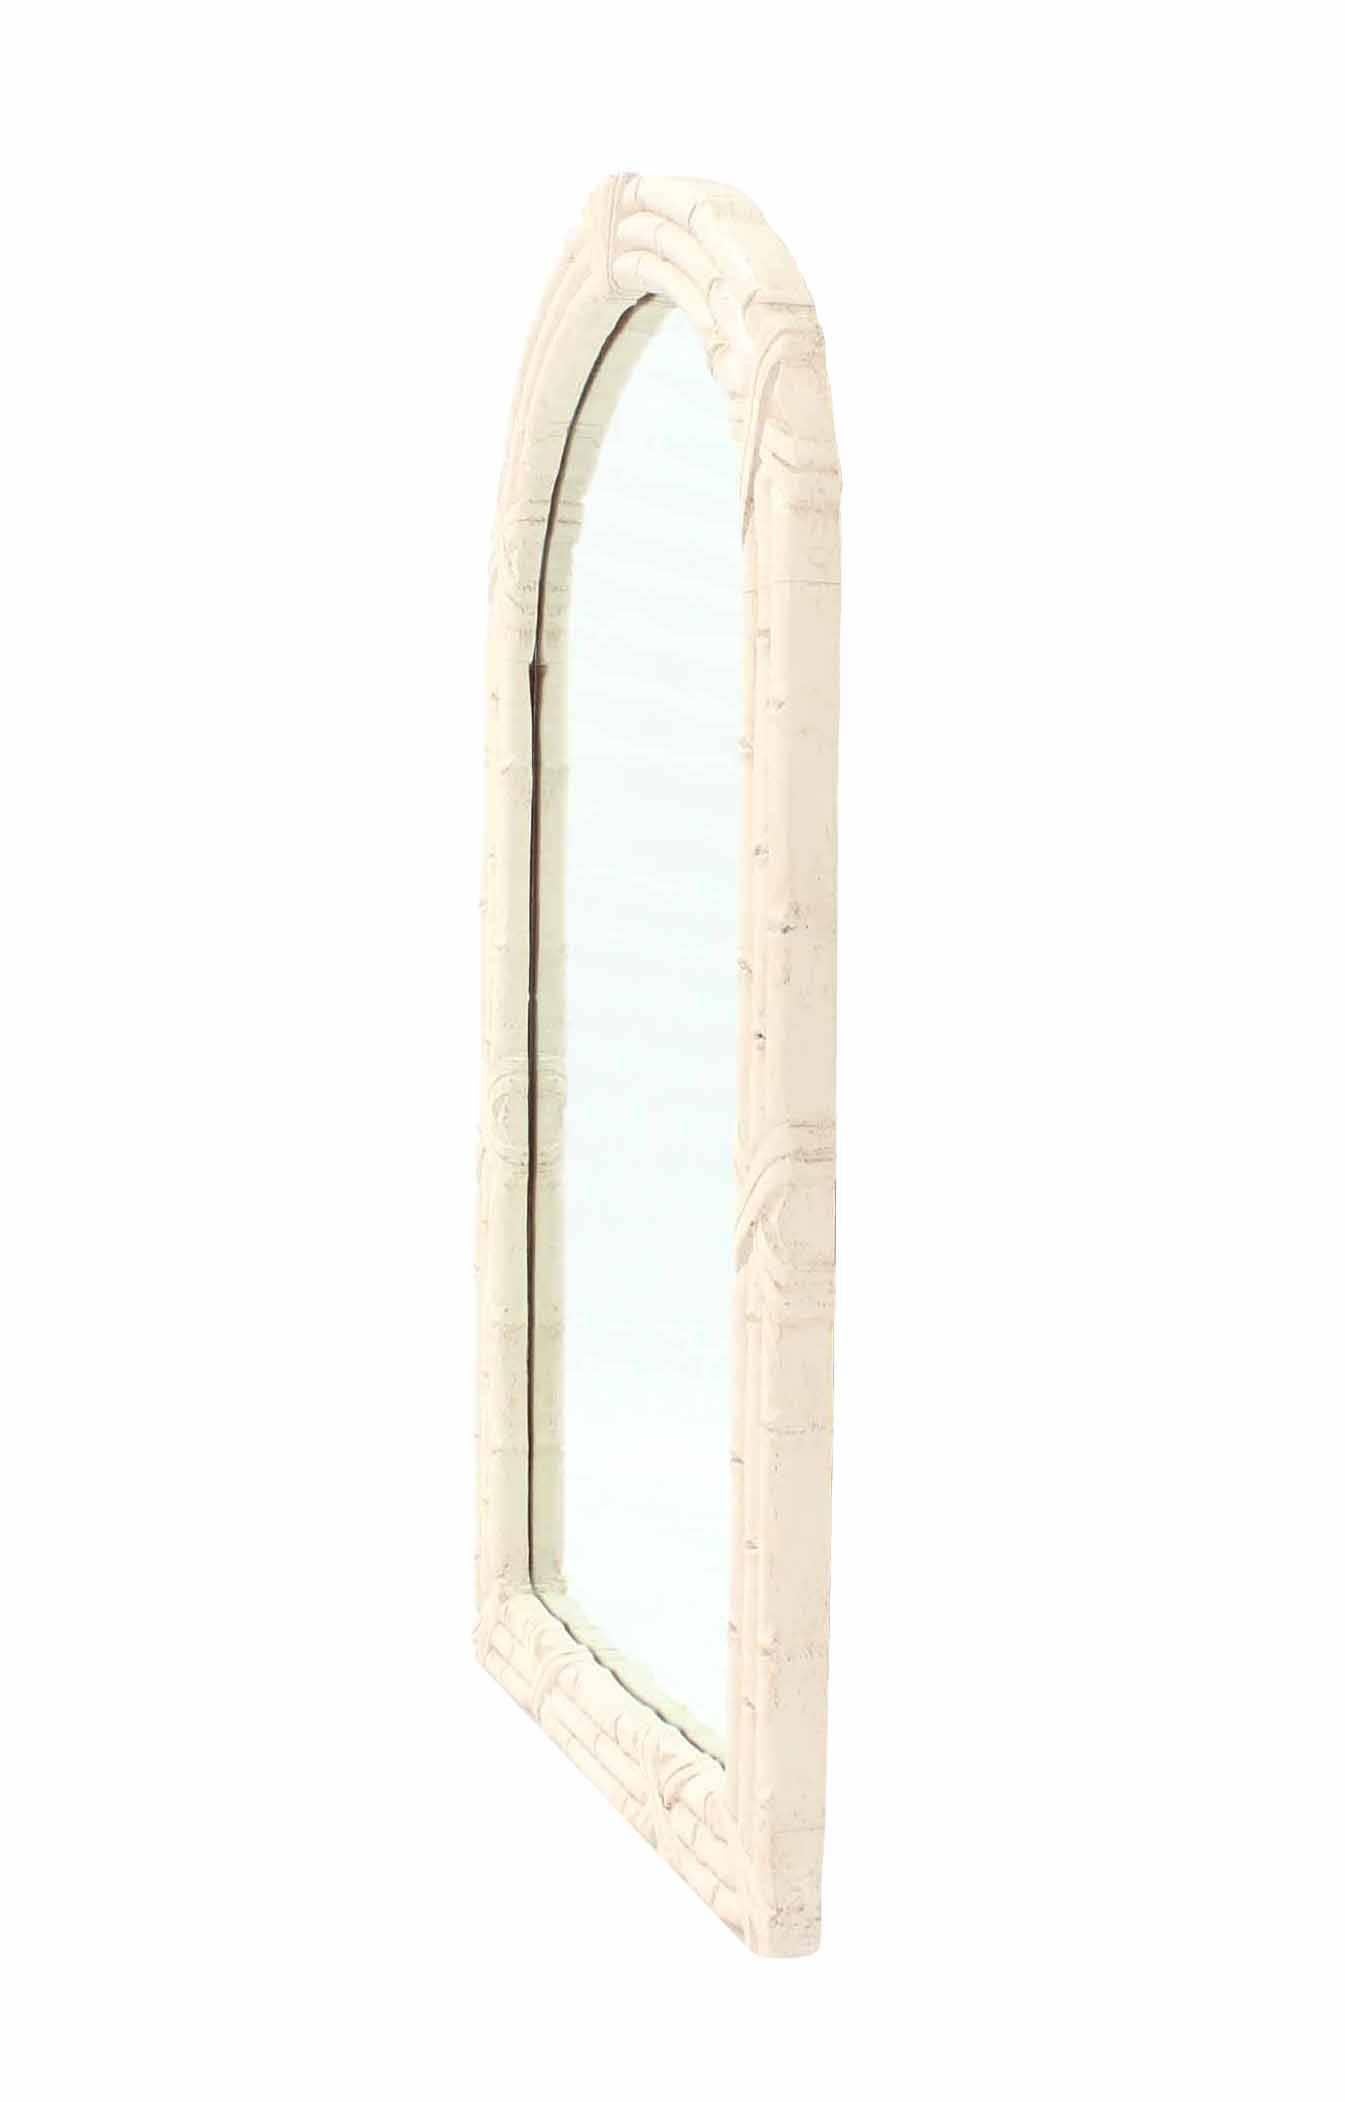 American Mid-Century Modern Arched Top Faux Bamboo Mirror For Sale